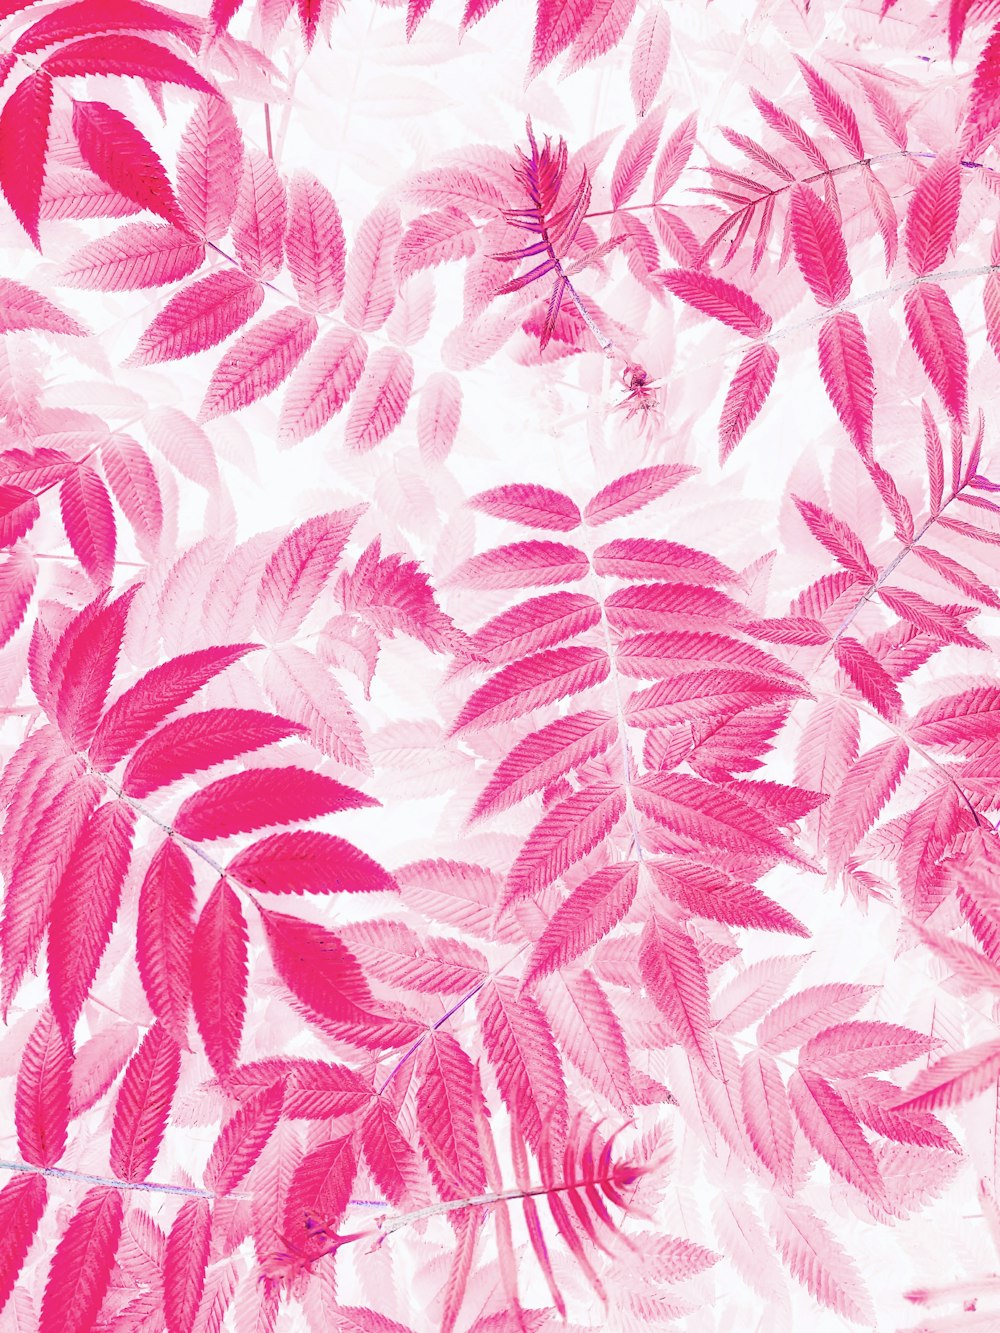 a close up of pink leaves on a white background